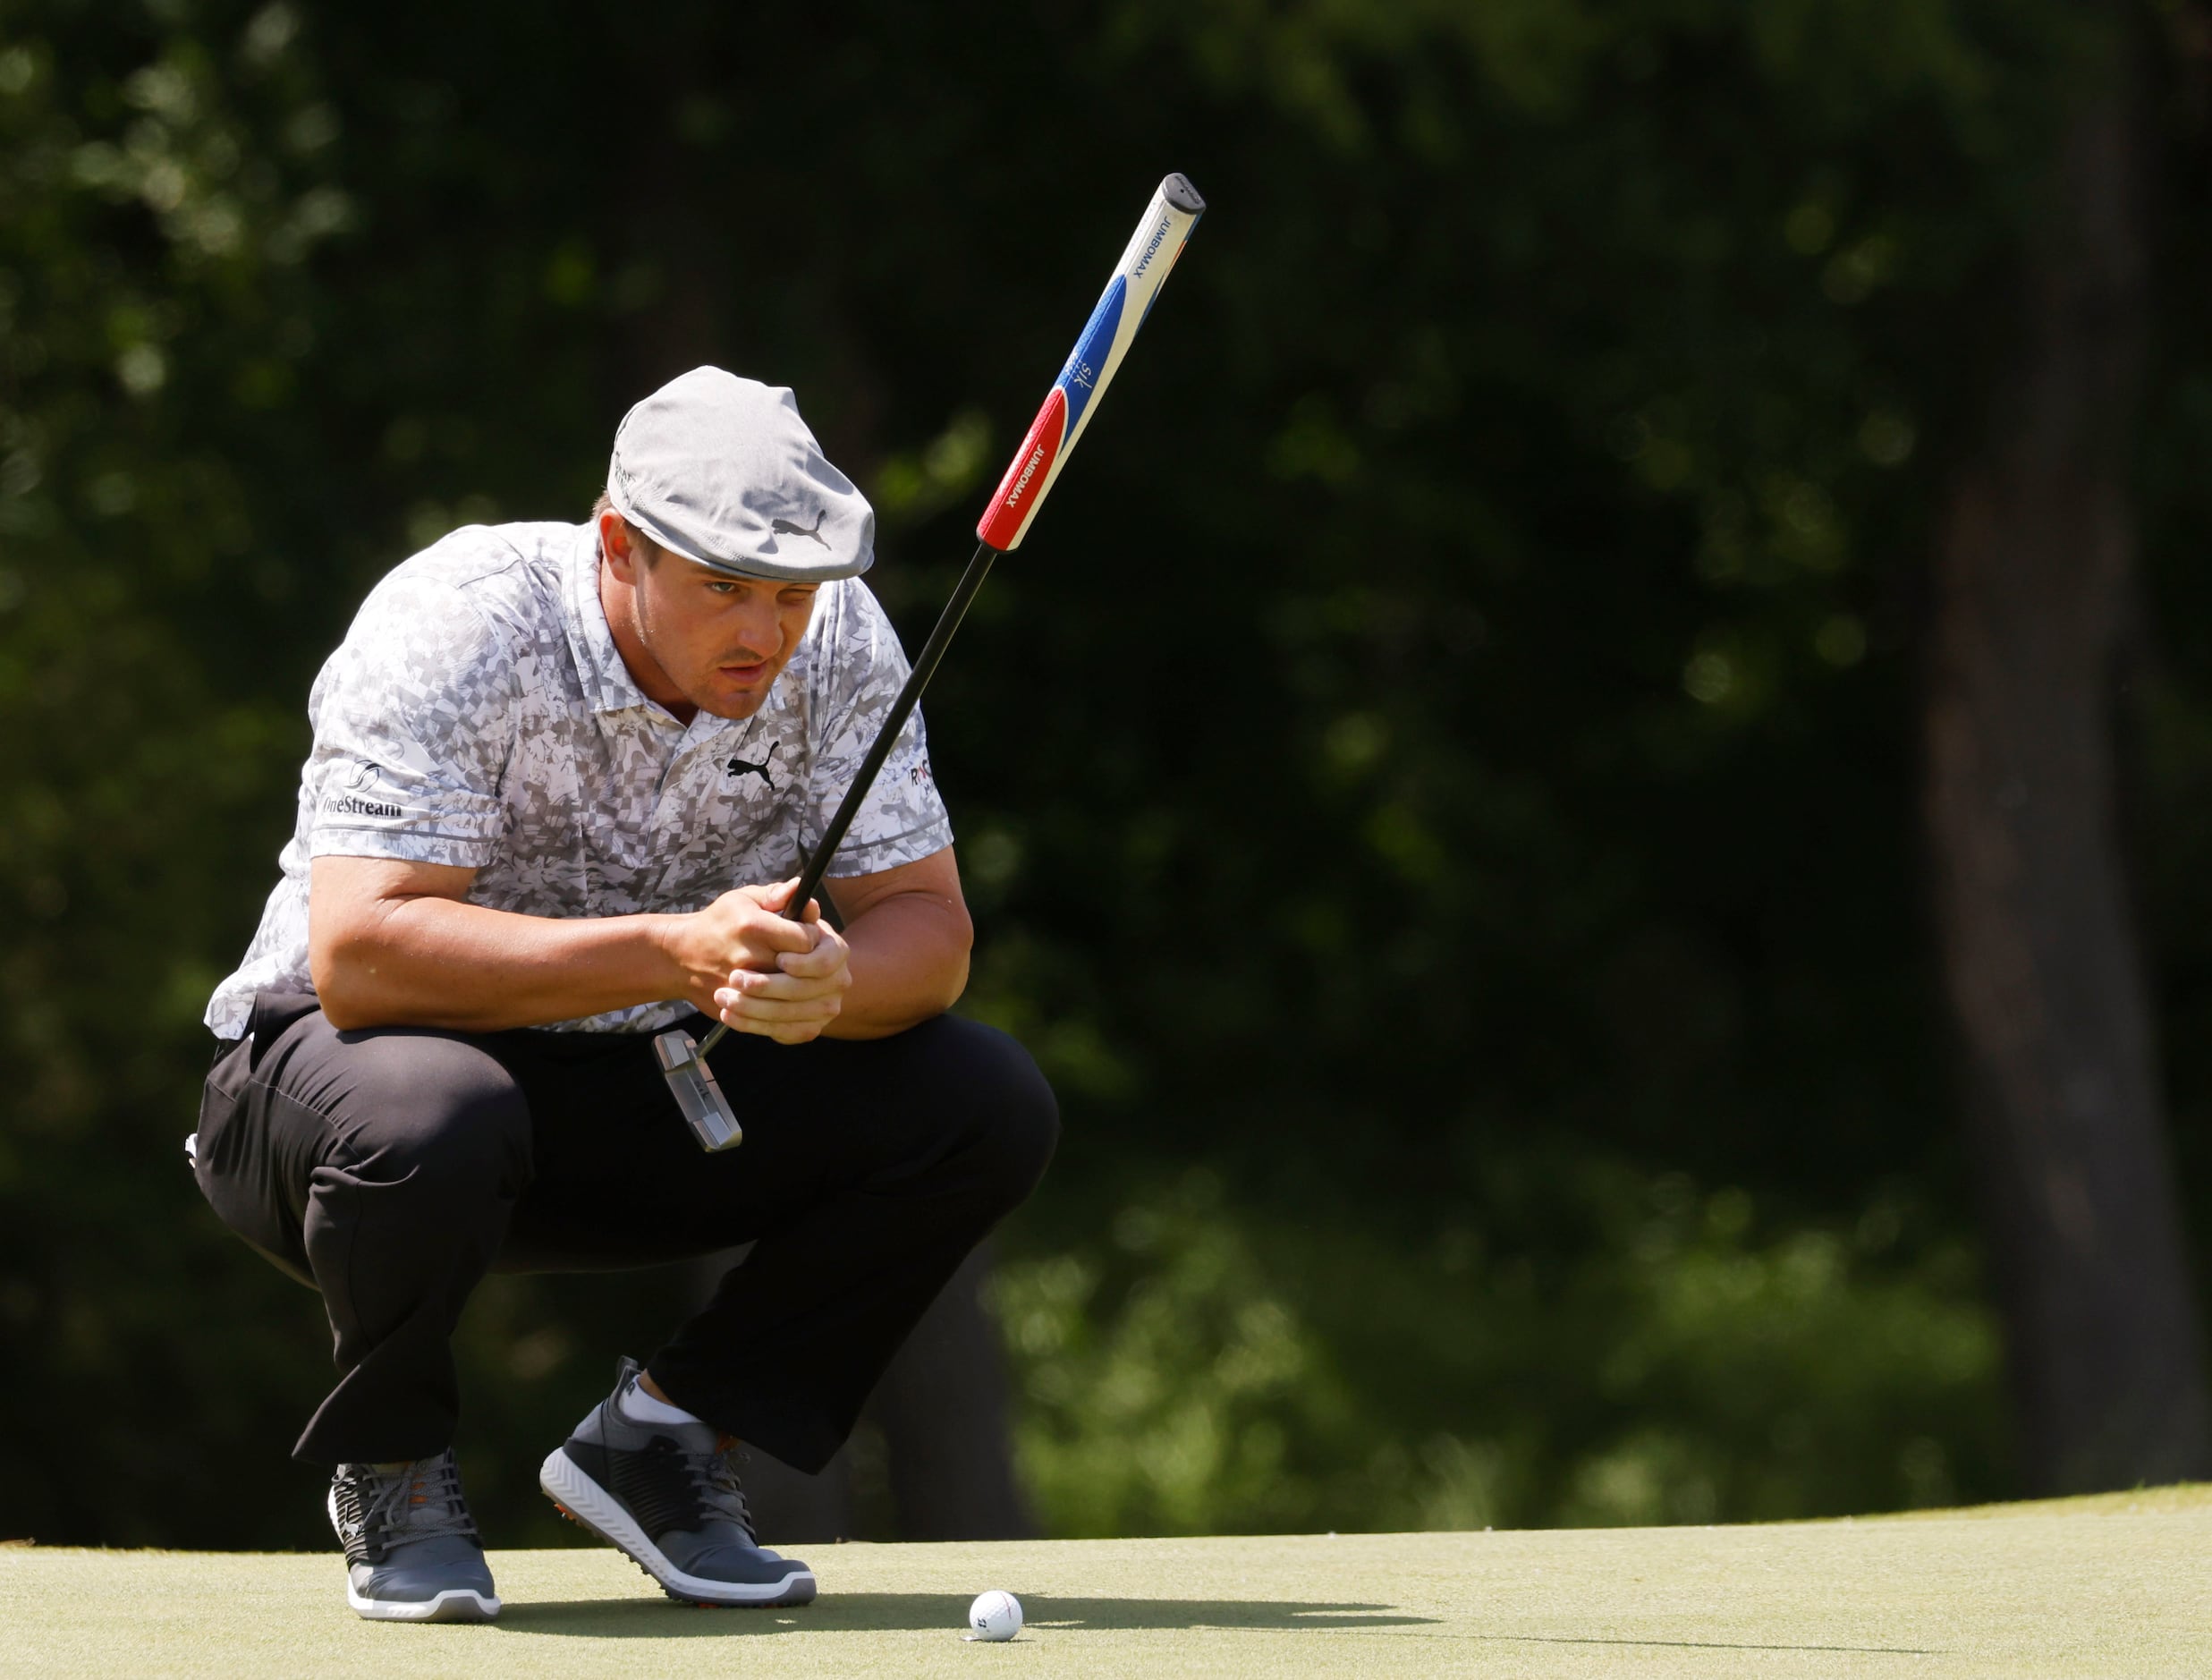 Bryson DeChambeau lines up his putt on the 9th hole during round 2 of the AT&T Byron Nelson ...